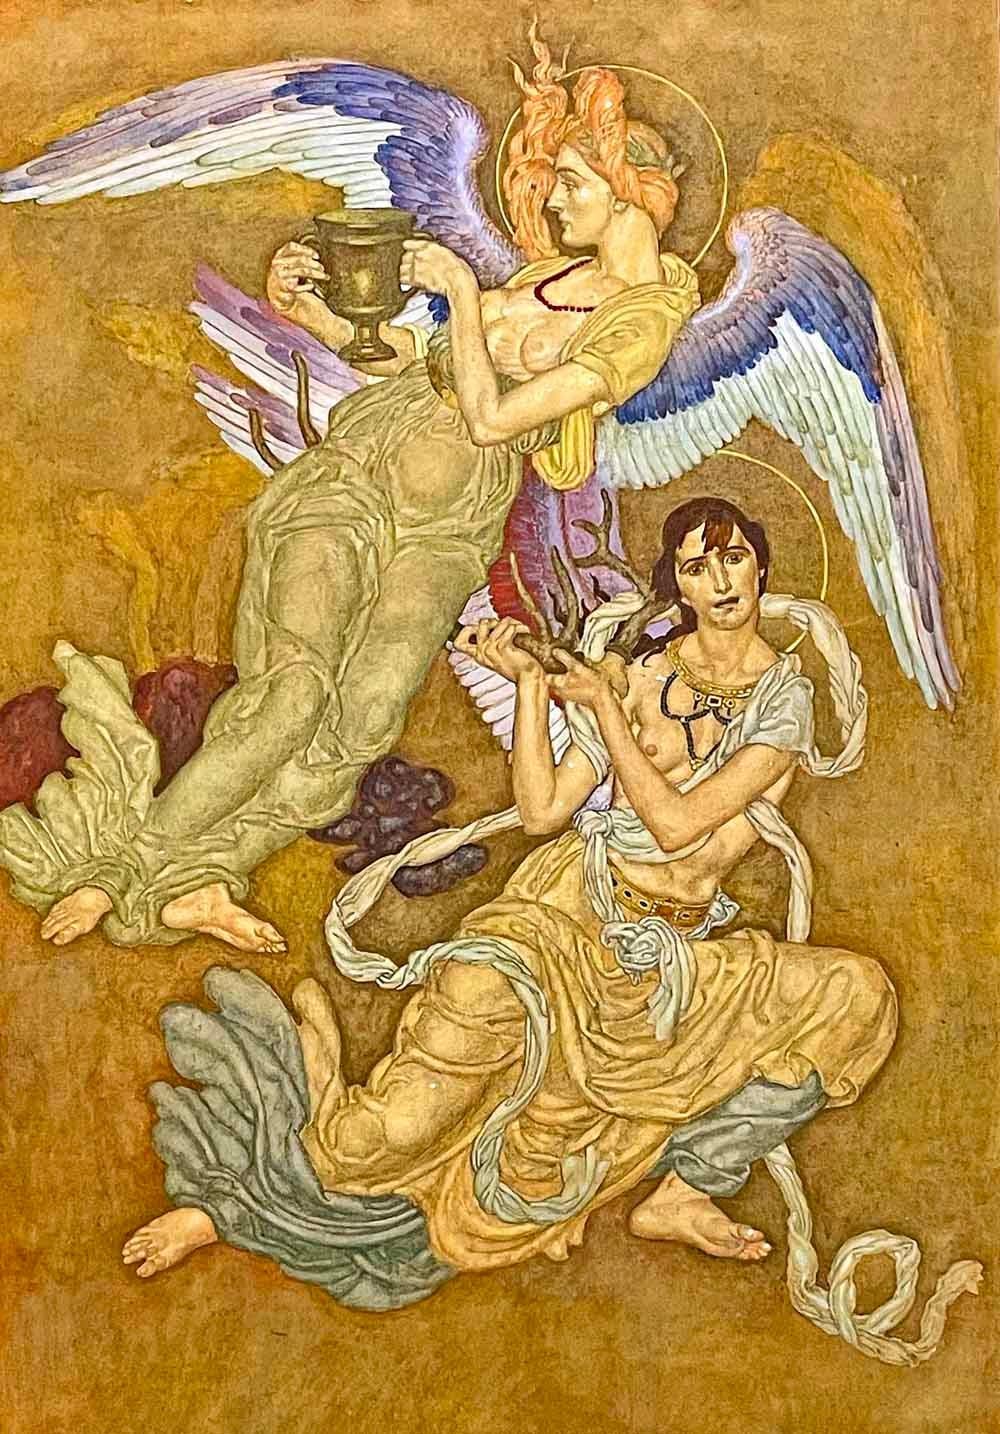 A true Art Deco masterpiece, painted as a final study for one of a series of large murals for the National Elks Memorial in Chicago, finished in 1926, this large gold-hued scene depicts two angels representing 